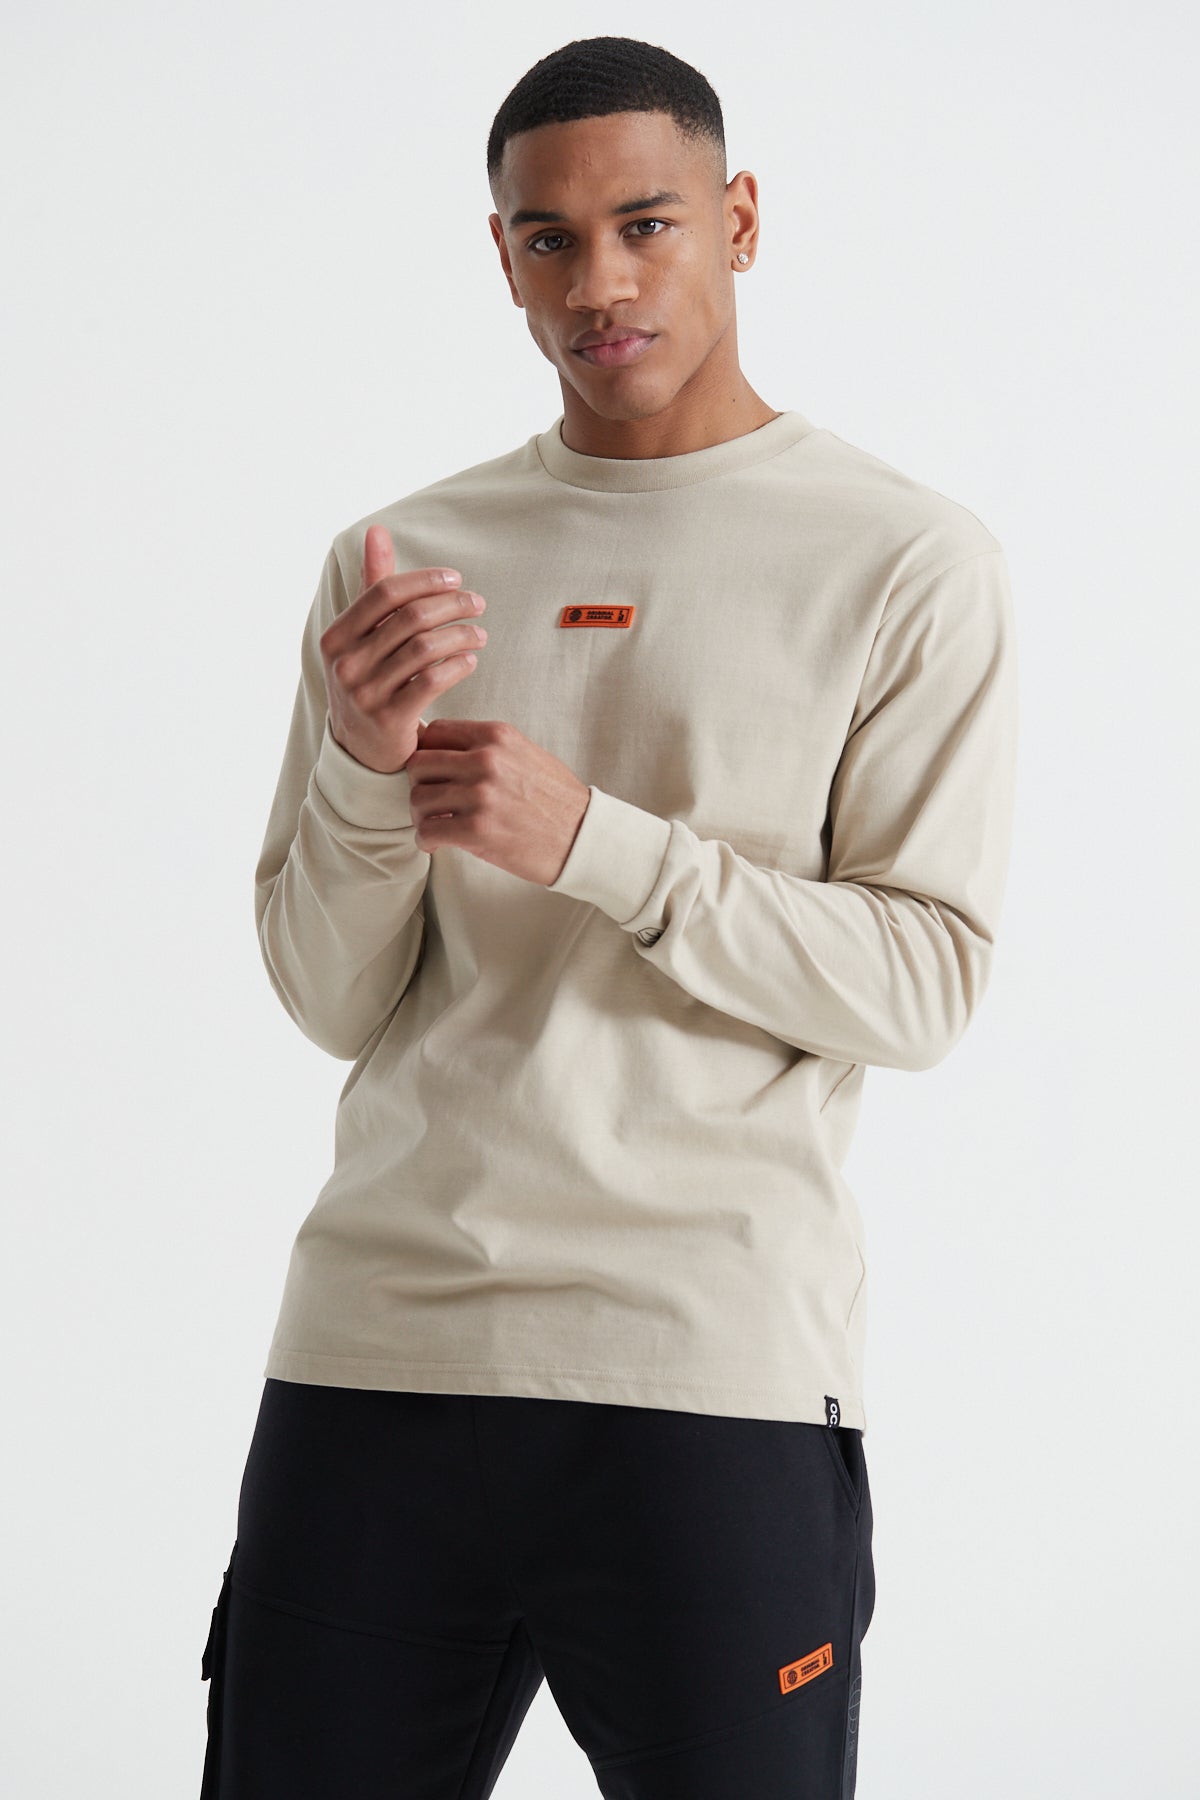 Off The Grid Long Sleeve T-shirt - Sand Stone